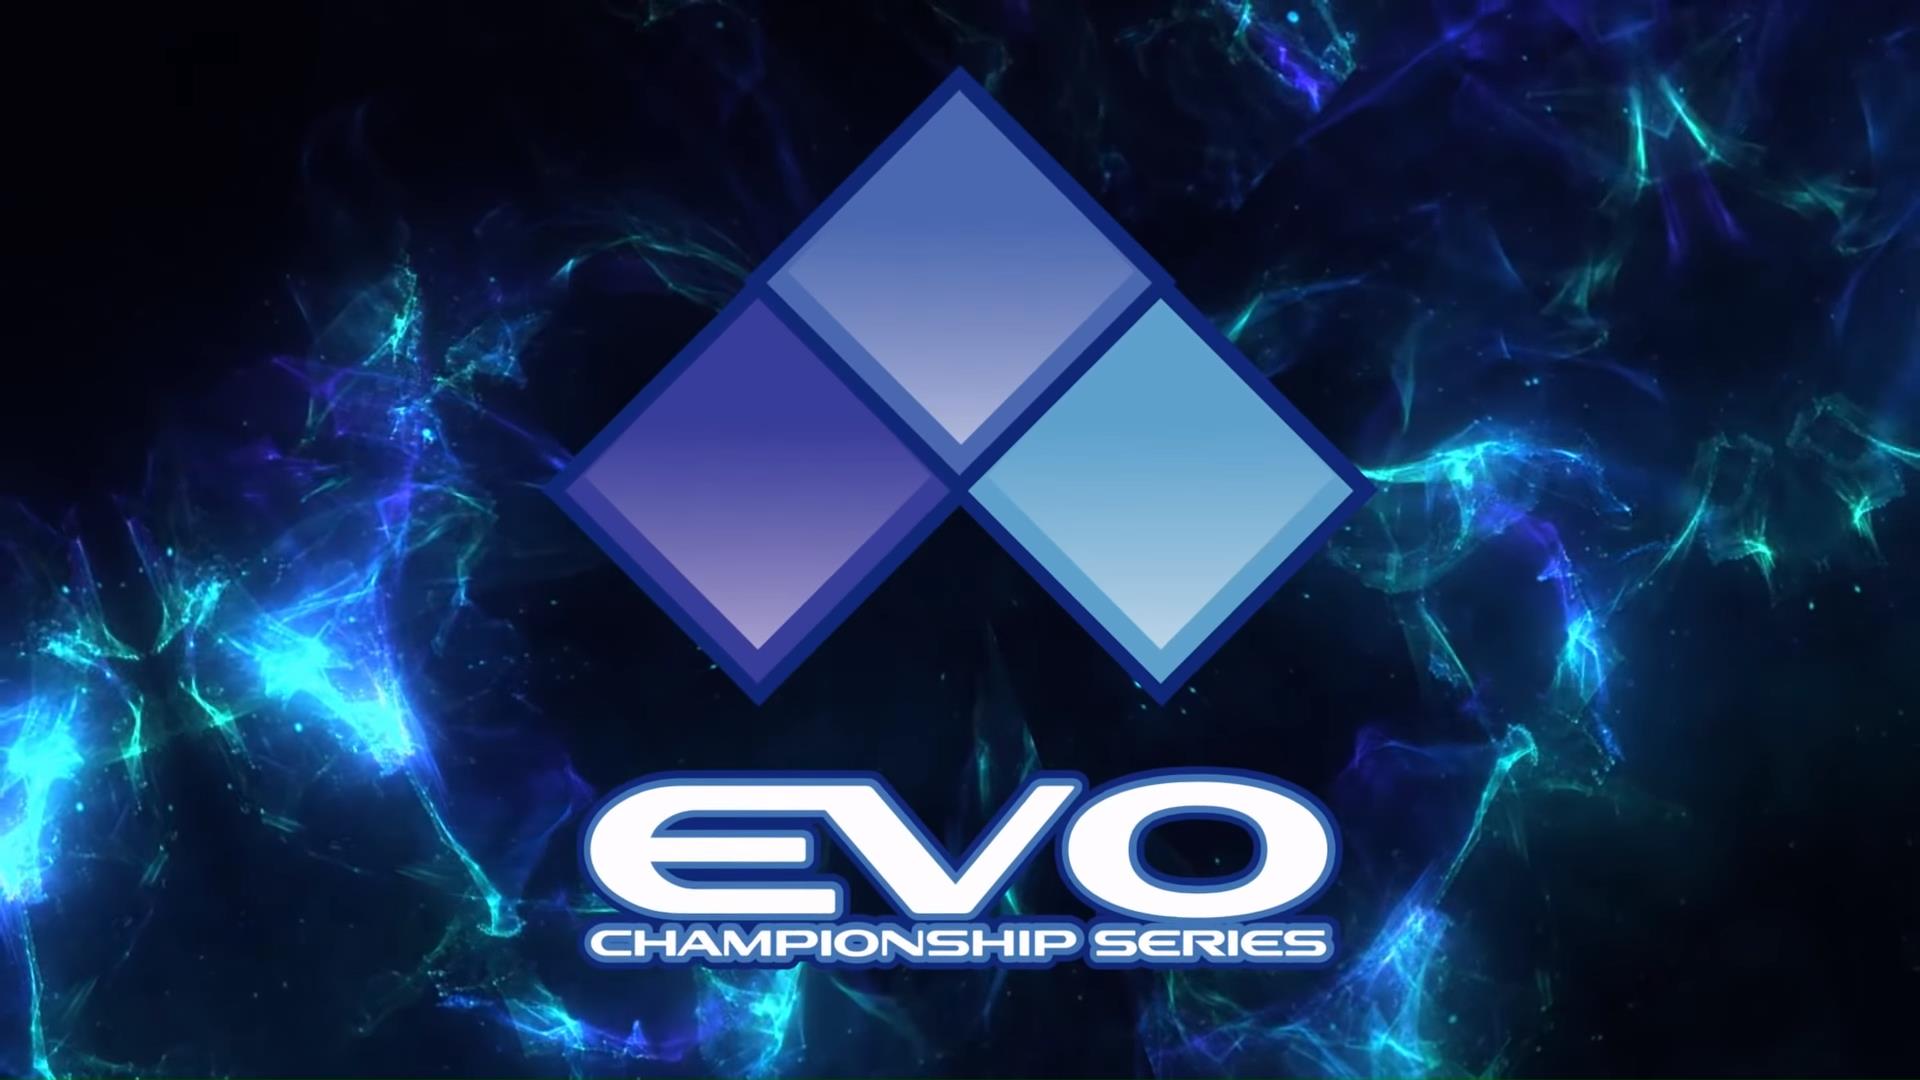 Image for Sony acquires fighting game tournament Evo, but it remains open to all platforms